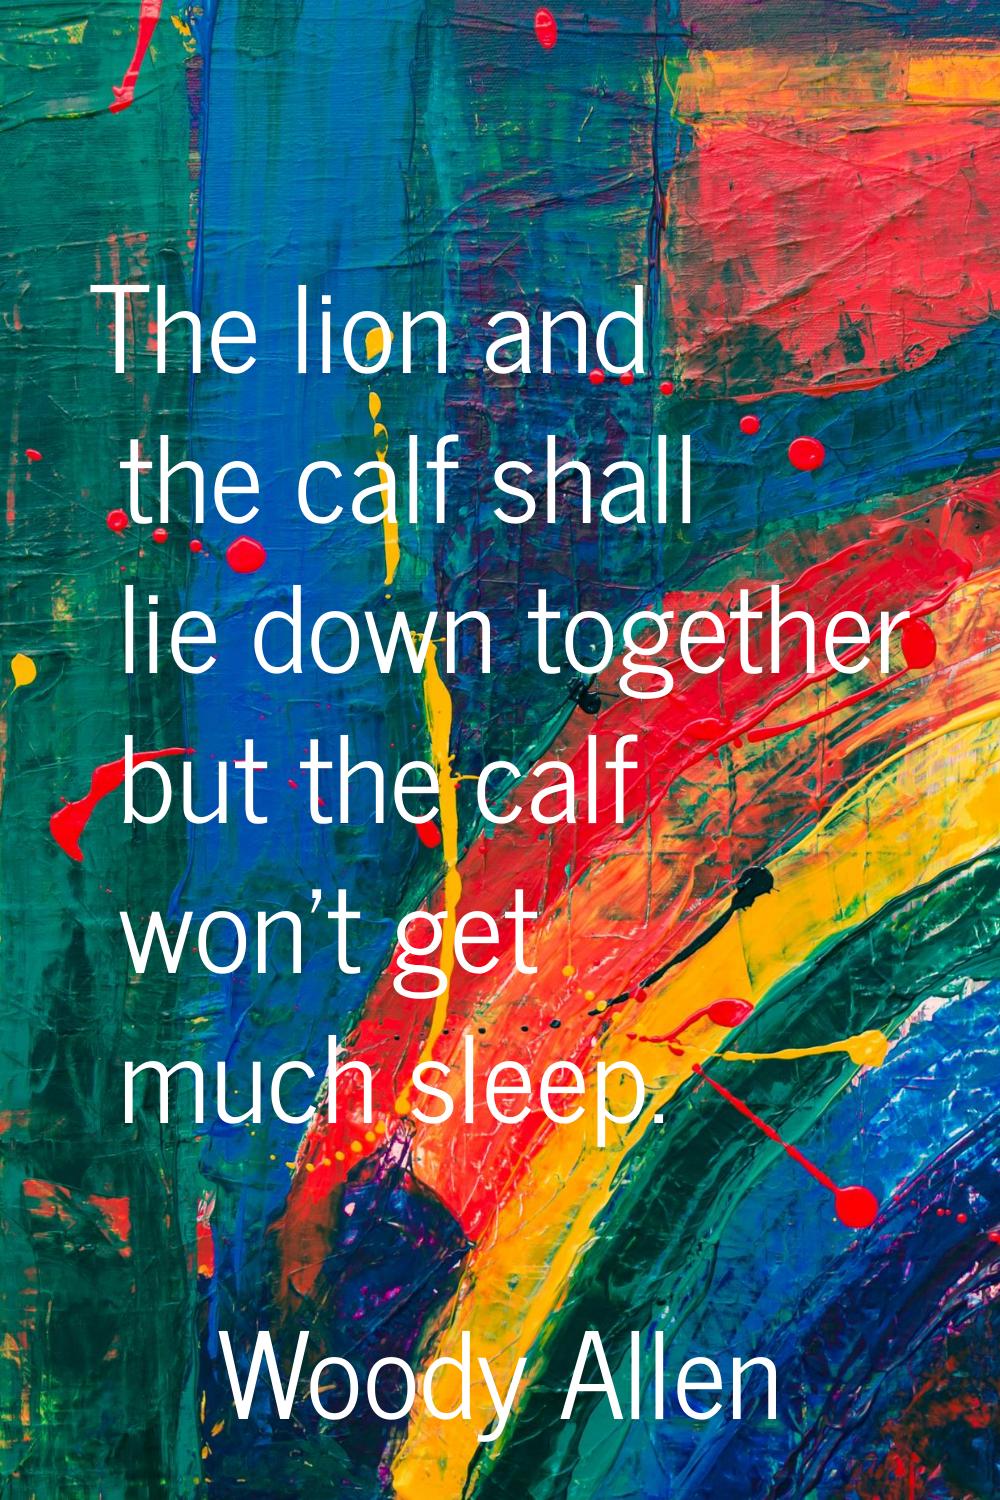 The lion and the calf shall lie down together but the calf won't get much sleep.